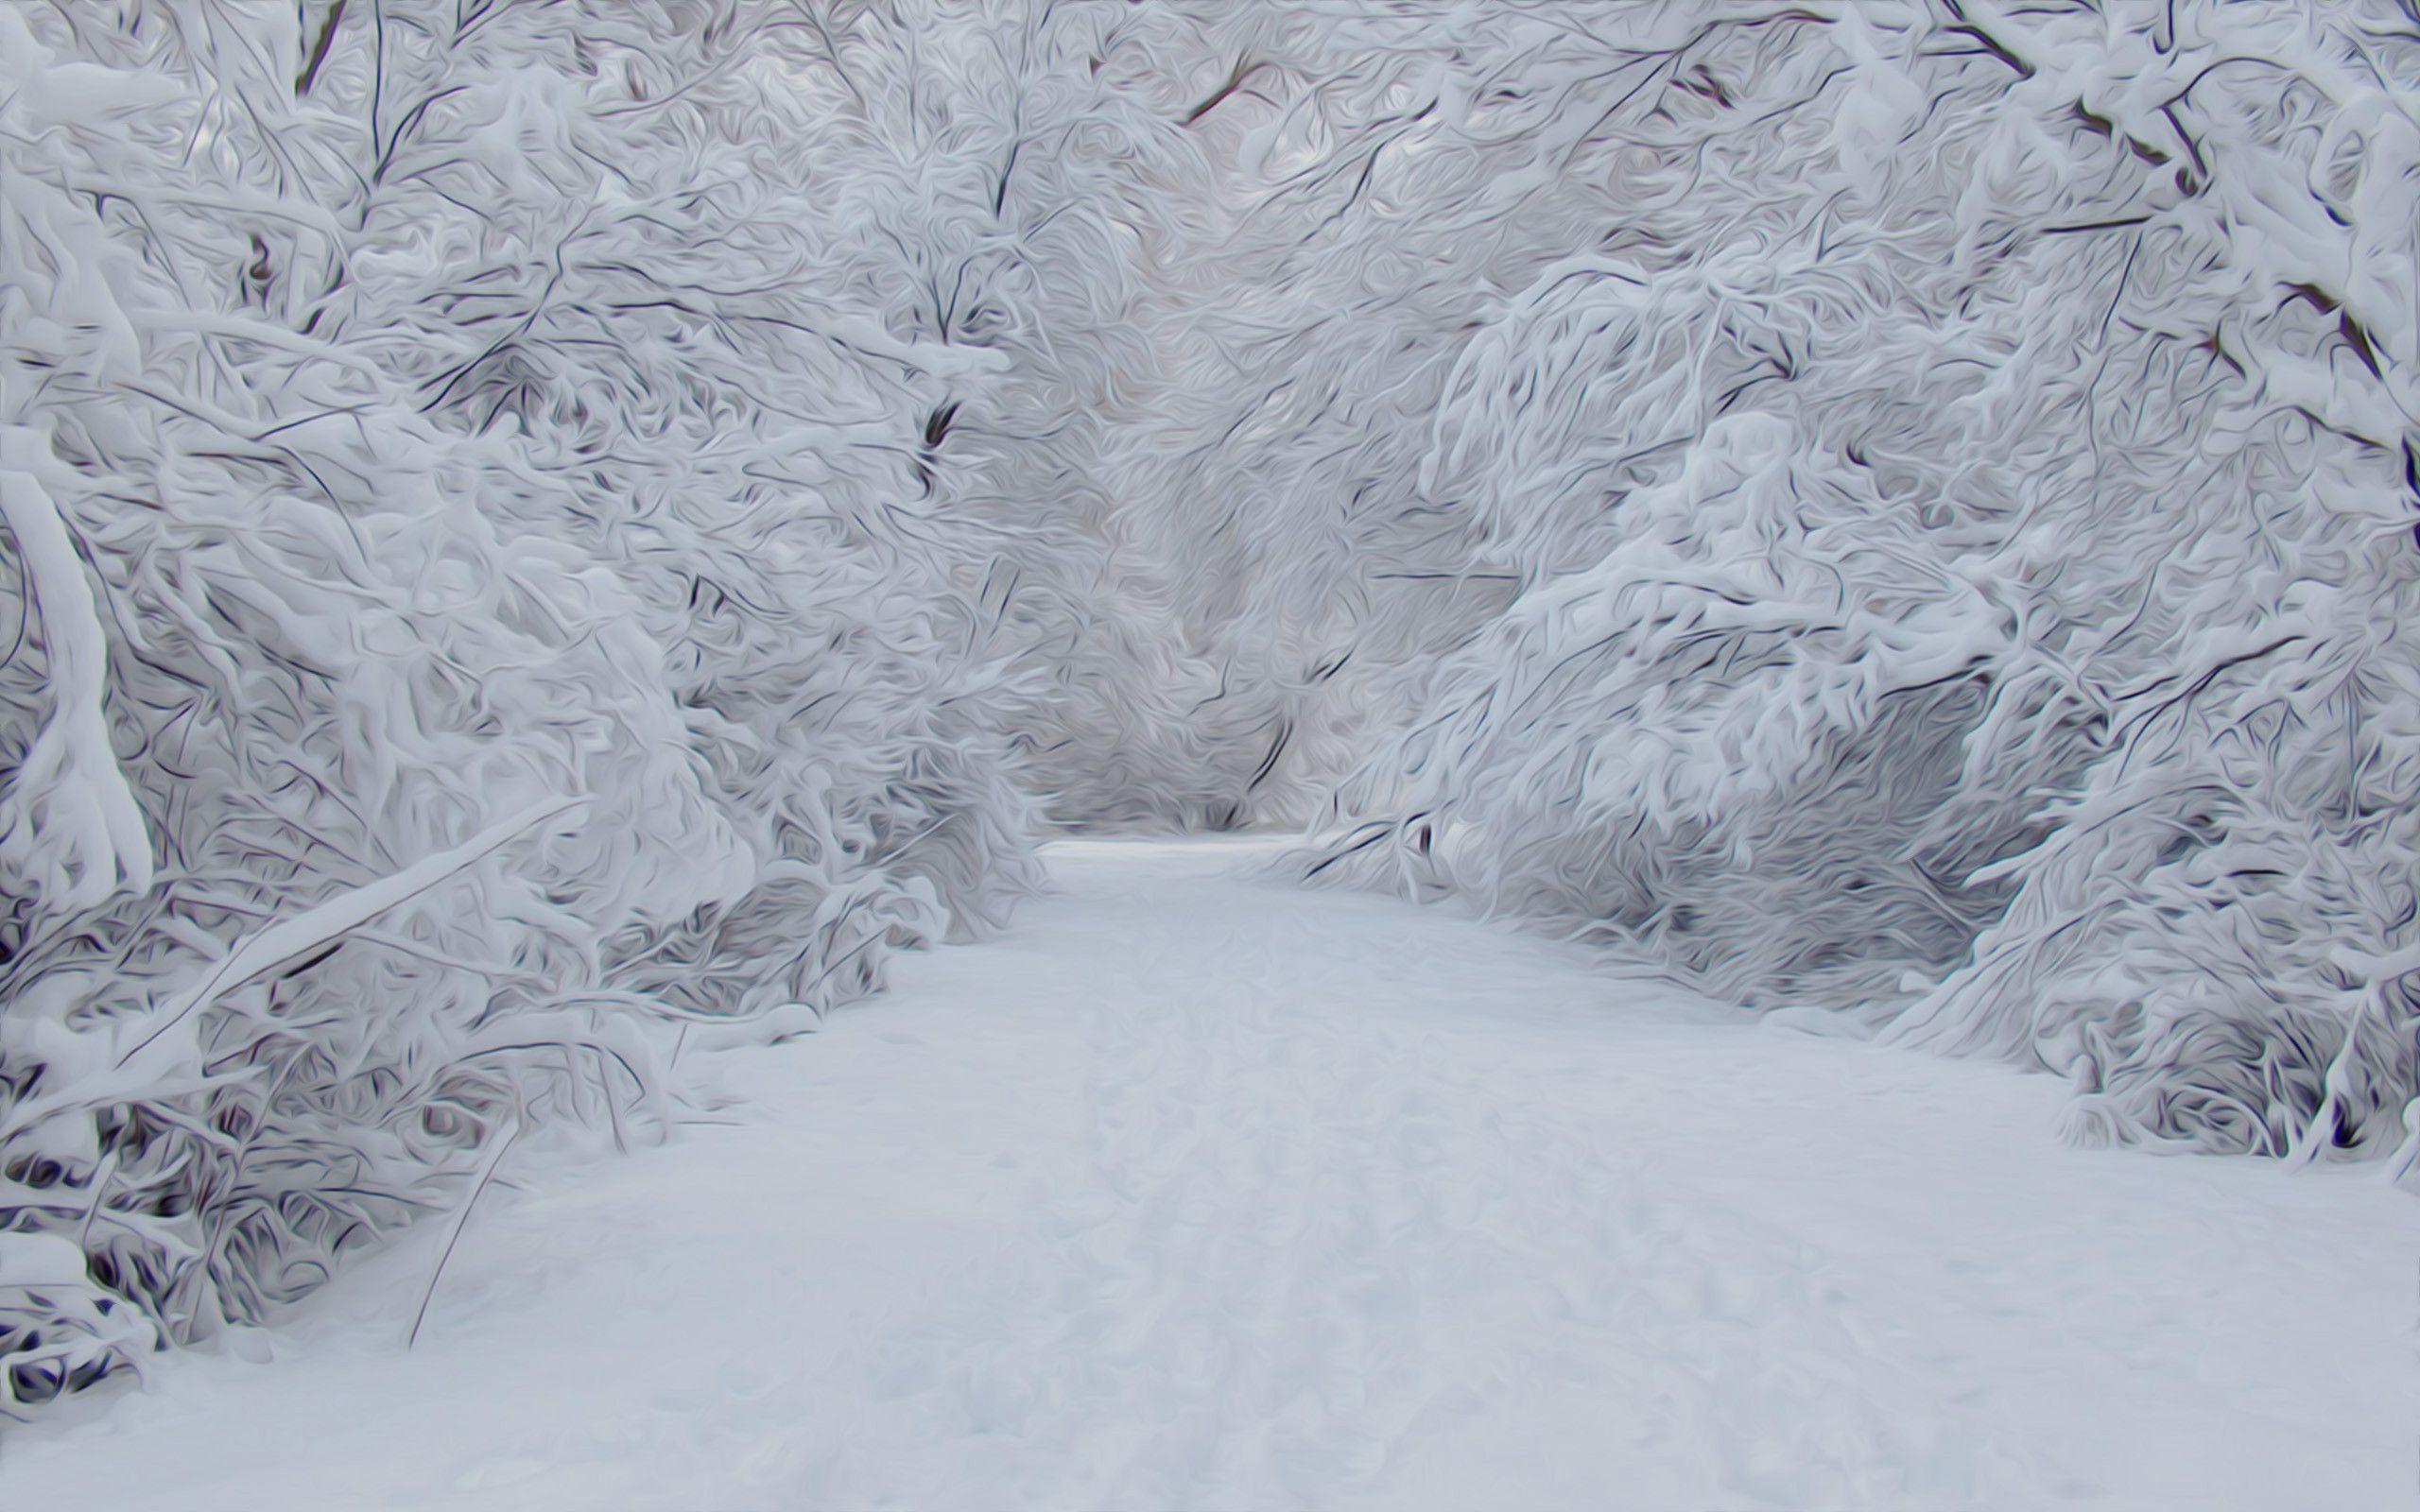 Winter image snowy snow HD wallpaper and background photo